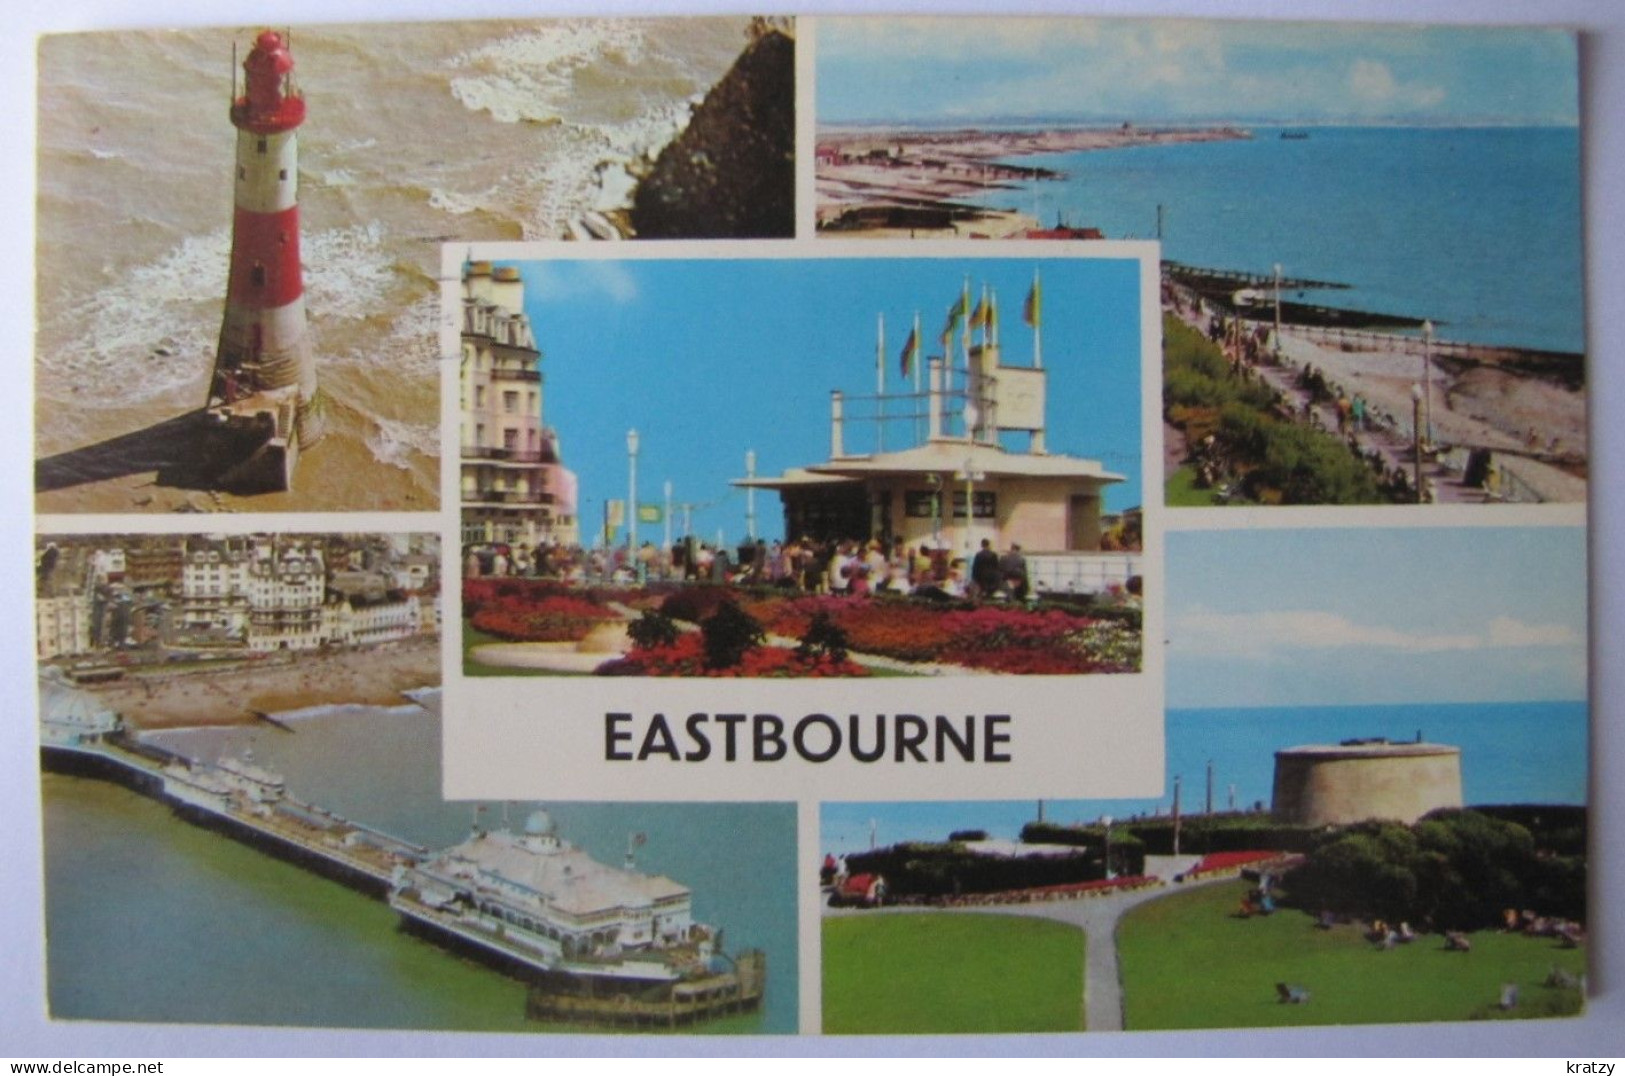 ROYAUME-UNI - ANGLETERRE - SUSSEX - EASTBOURNE - Views - 1972 - Eastbourne